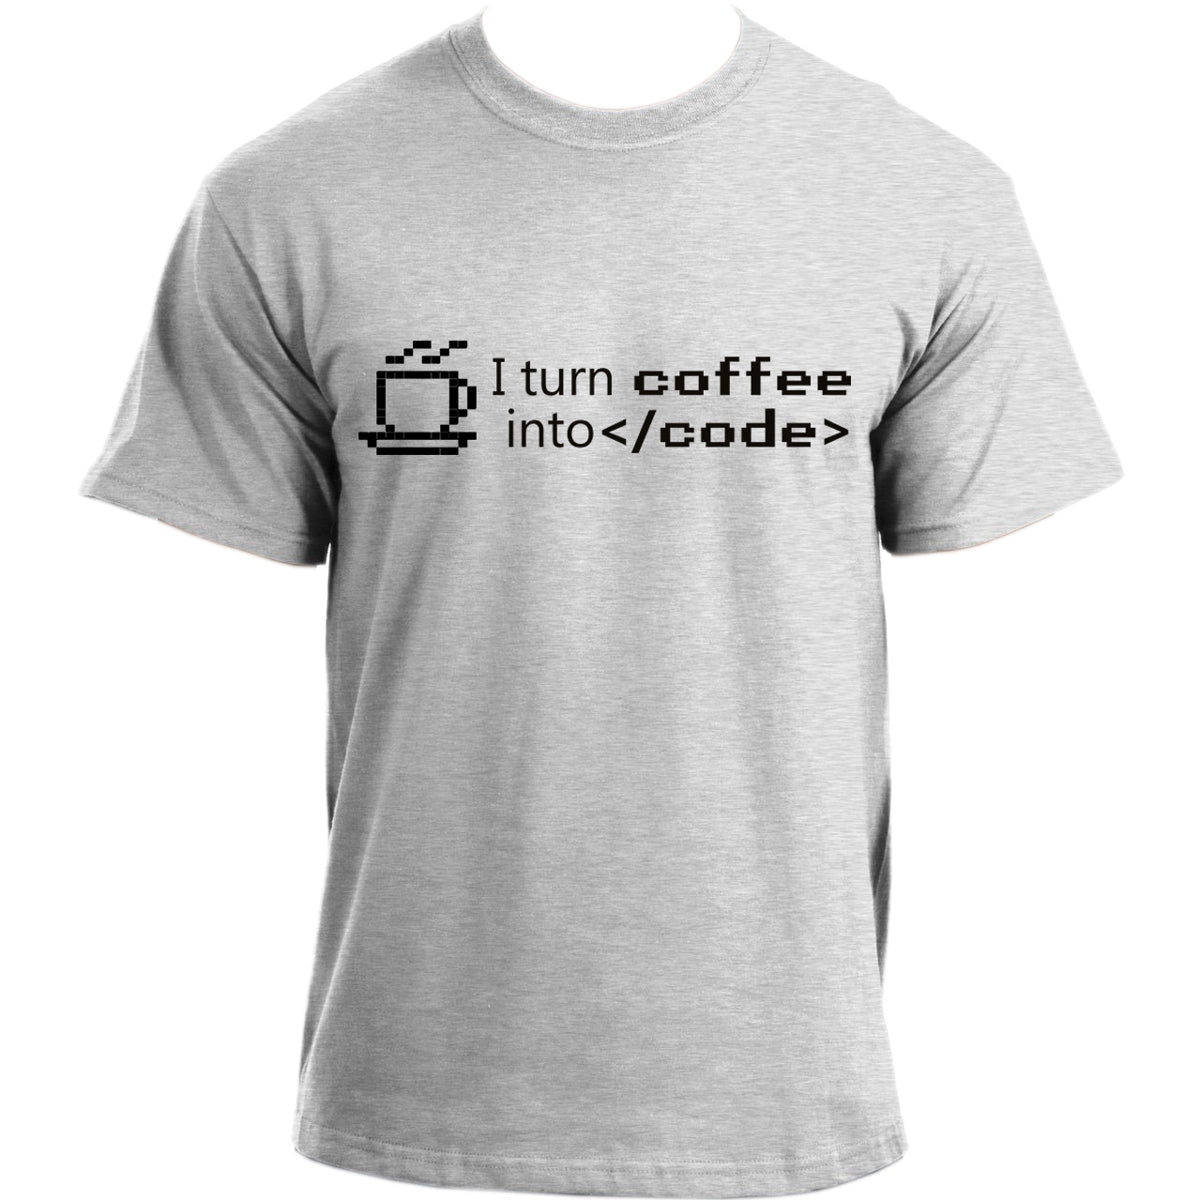 I Turn Coffee Into Code T Shirt - Funny Computer Programmers T-Shirt - Funky Geek Coffee Tshirt for Men